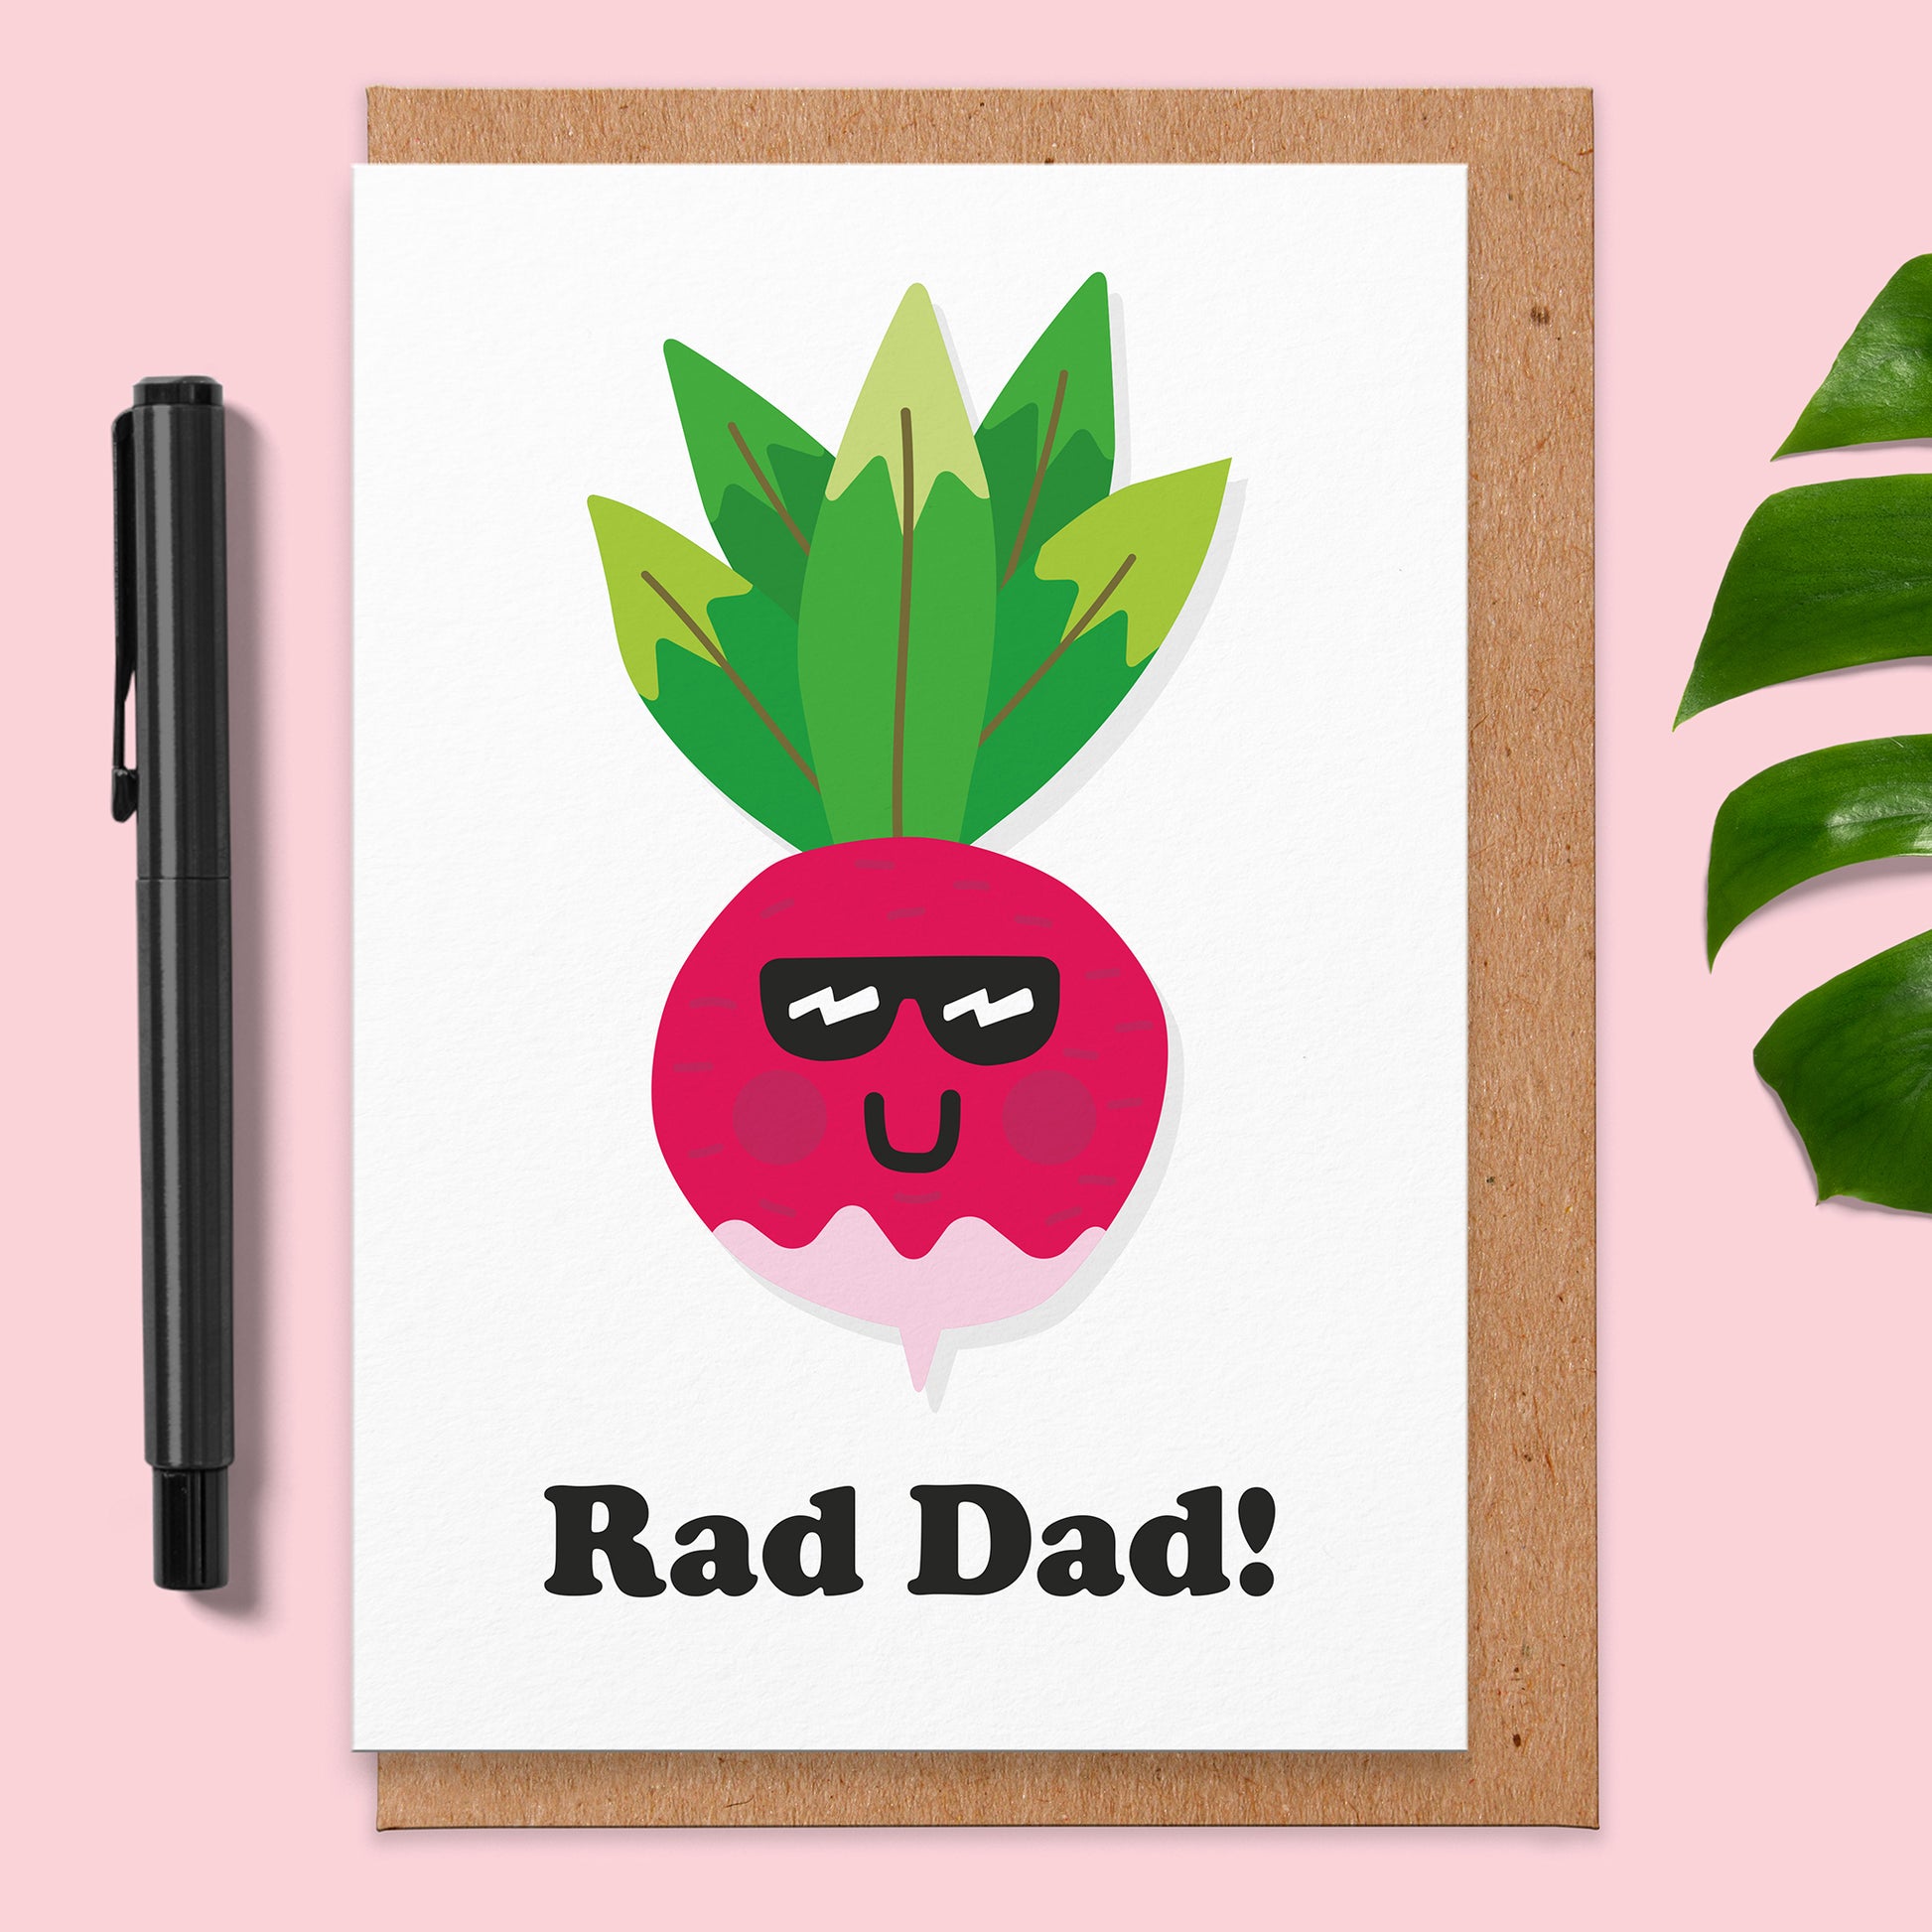 Father's Day card with an illustration of a radish wearing sunglasses and has a smile and reads Rad Dad!